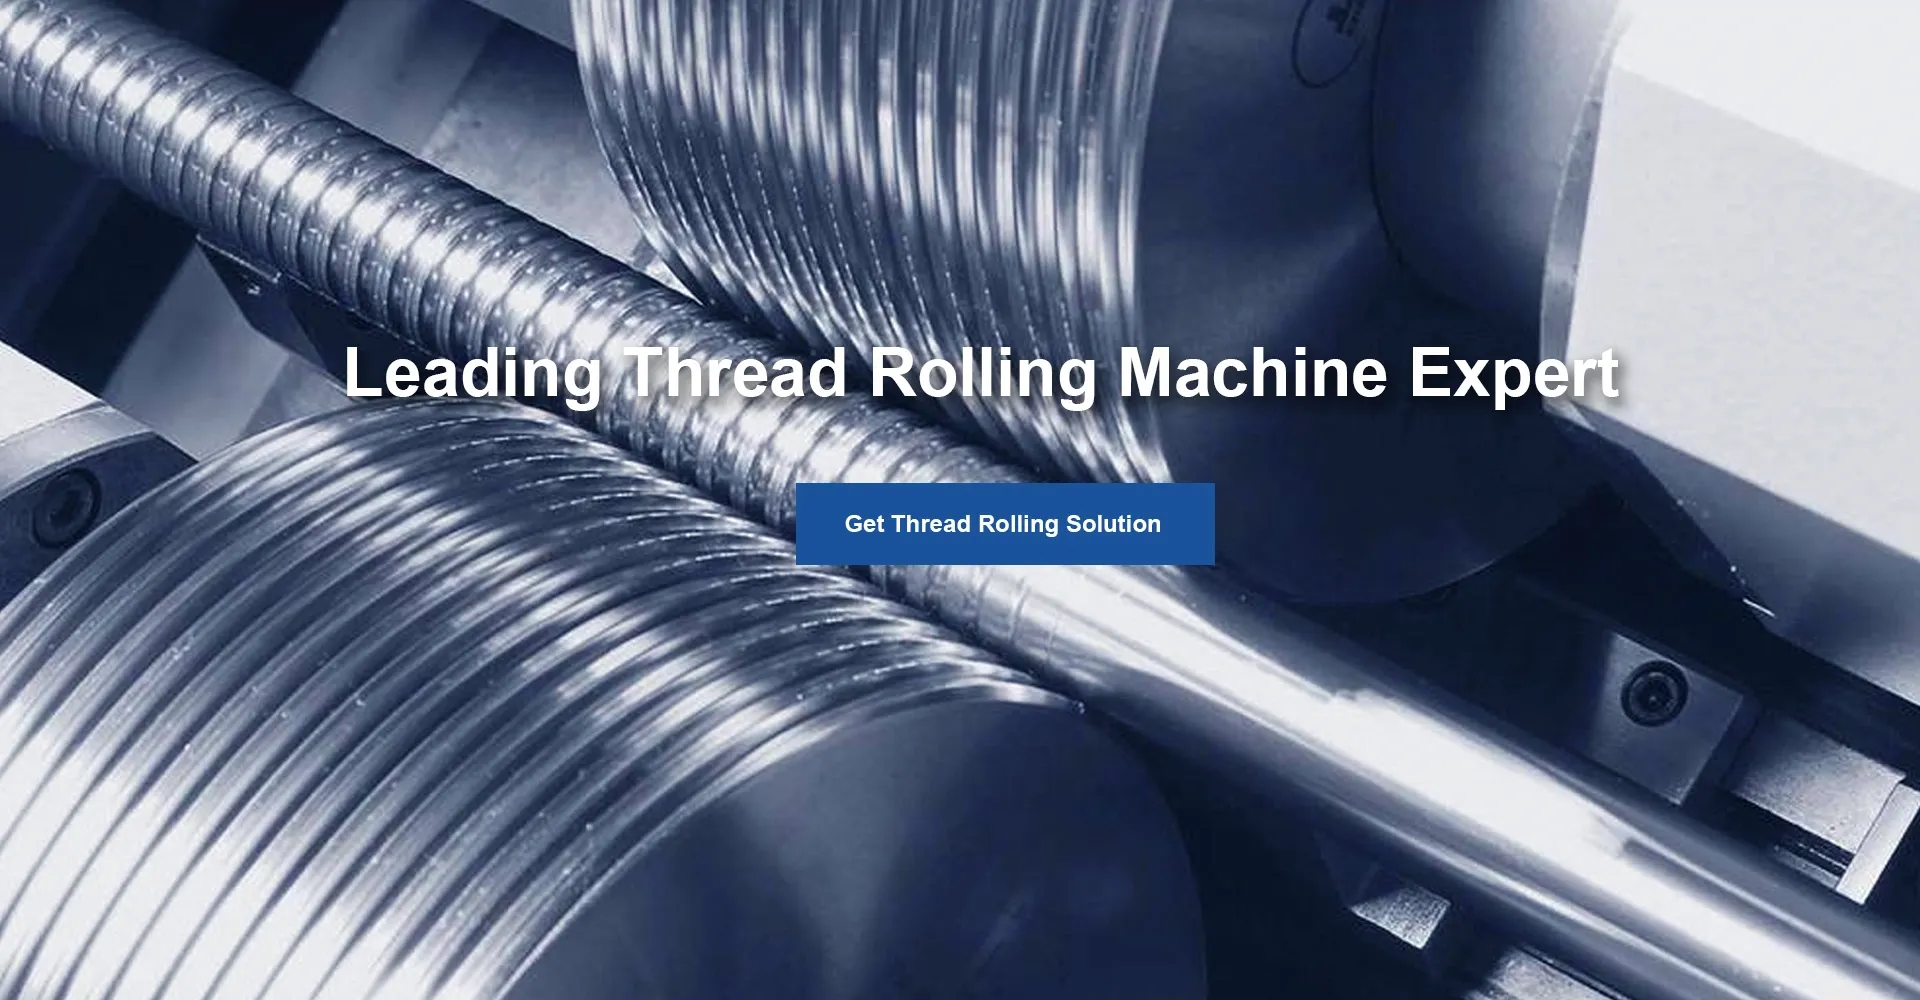 Read More About thread rolling machine